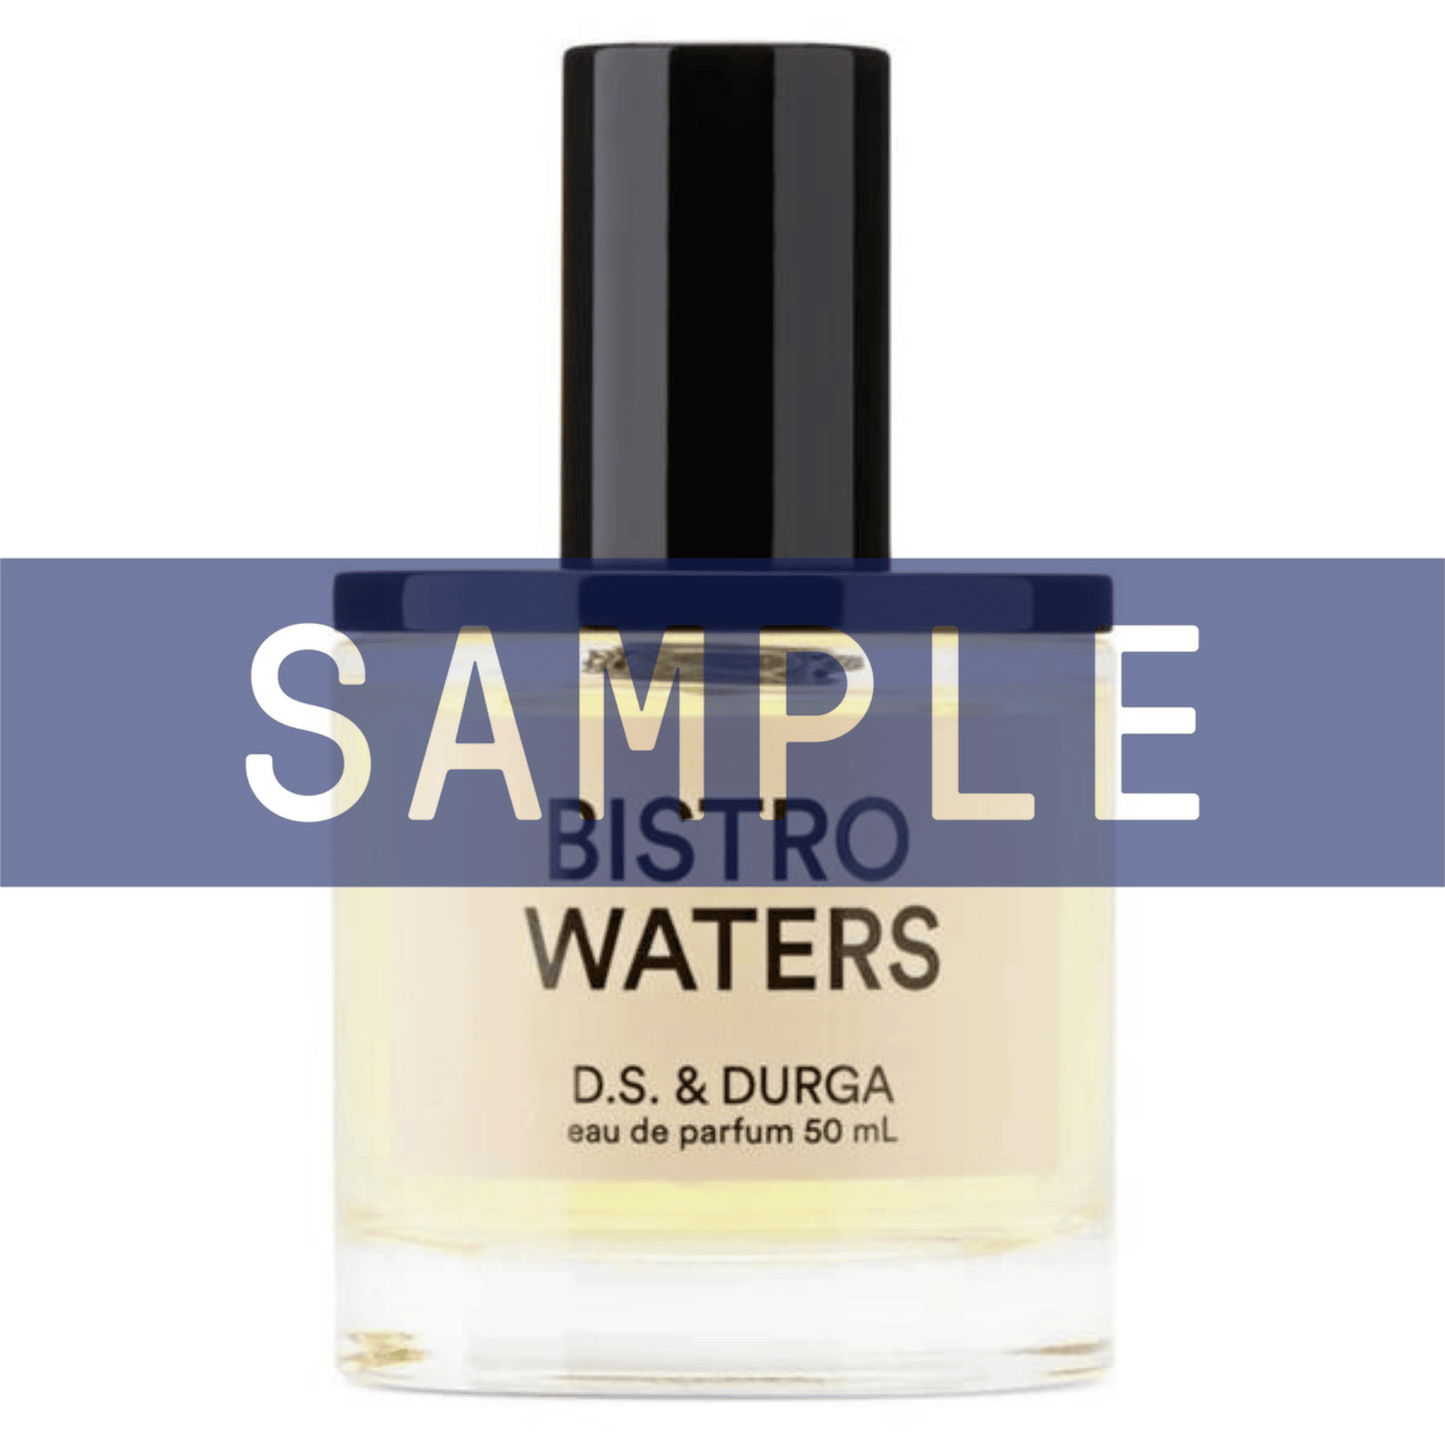 Primary Image of Sample - Bistro Waters EDP